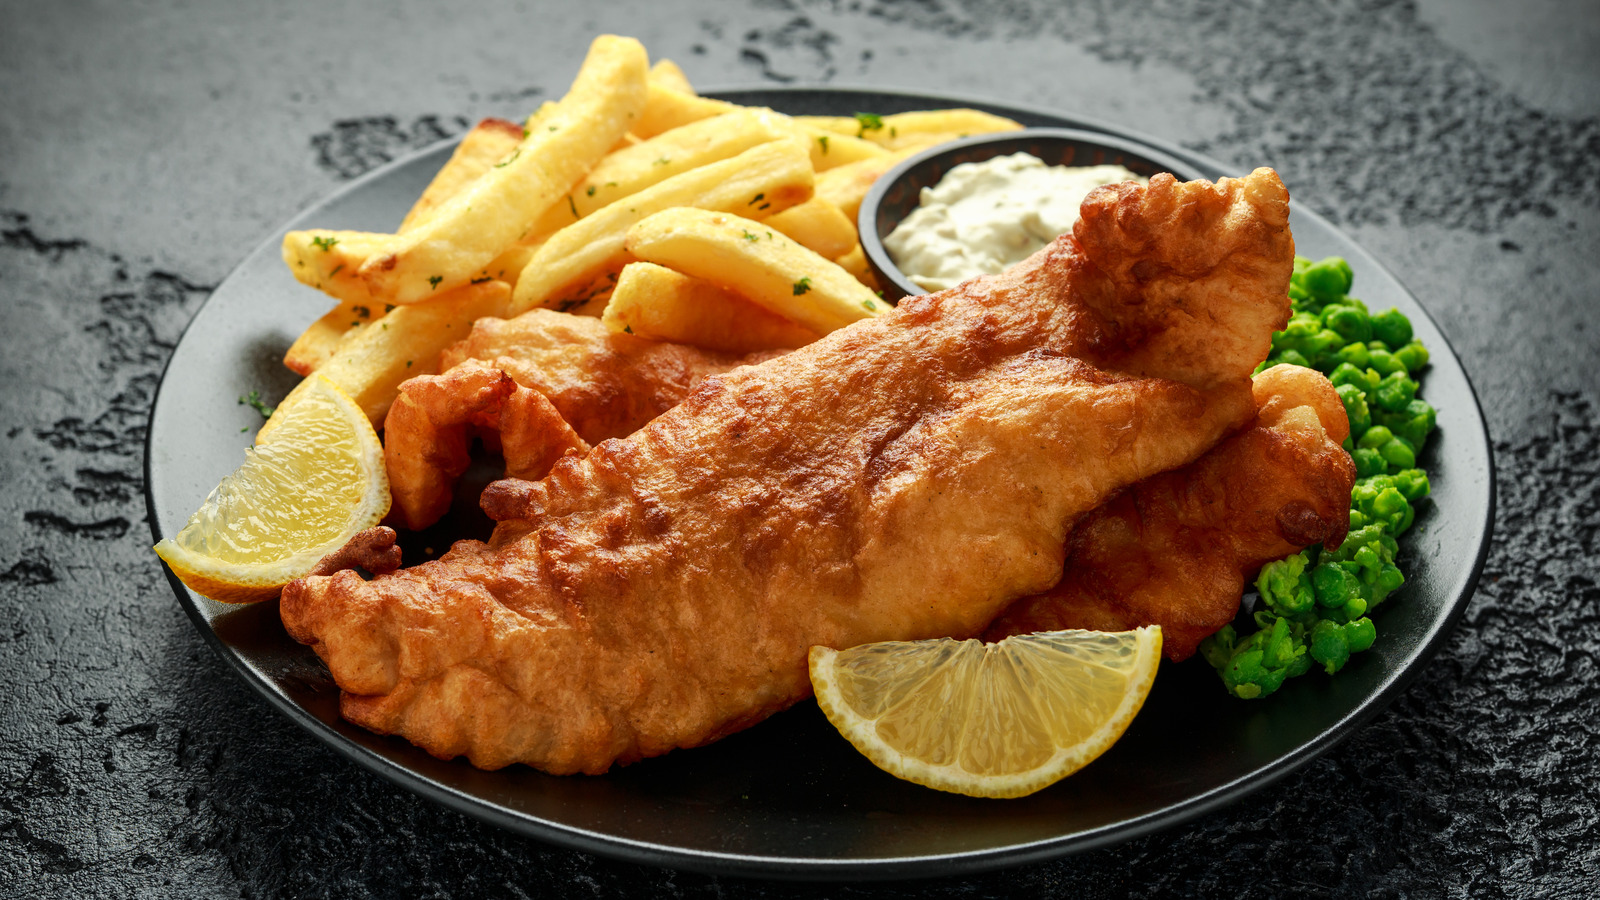 15 Best Spots For Fish And Chips In London